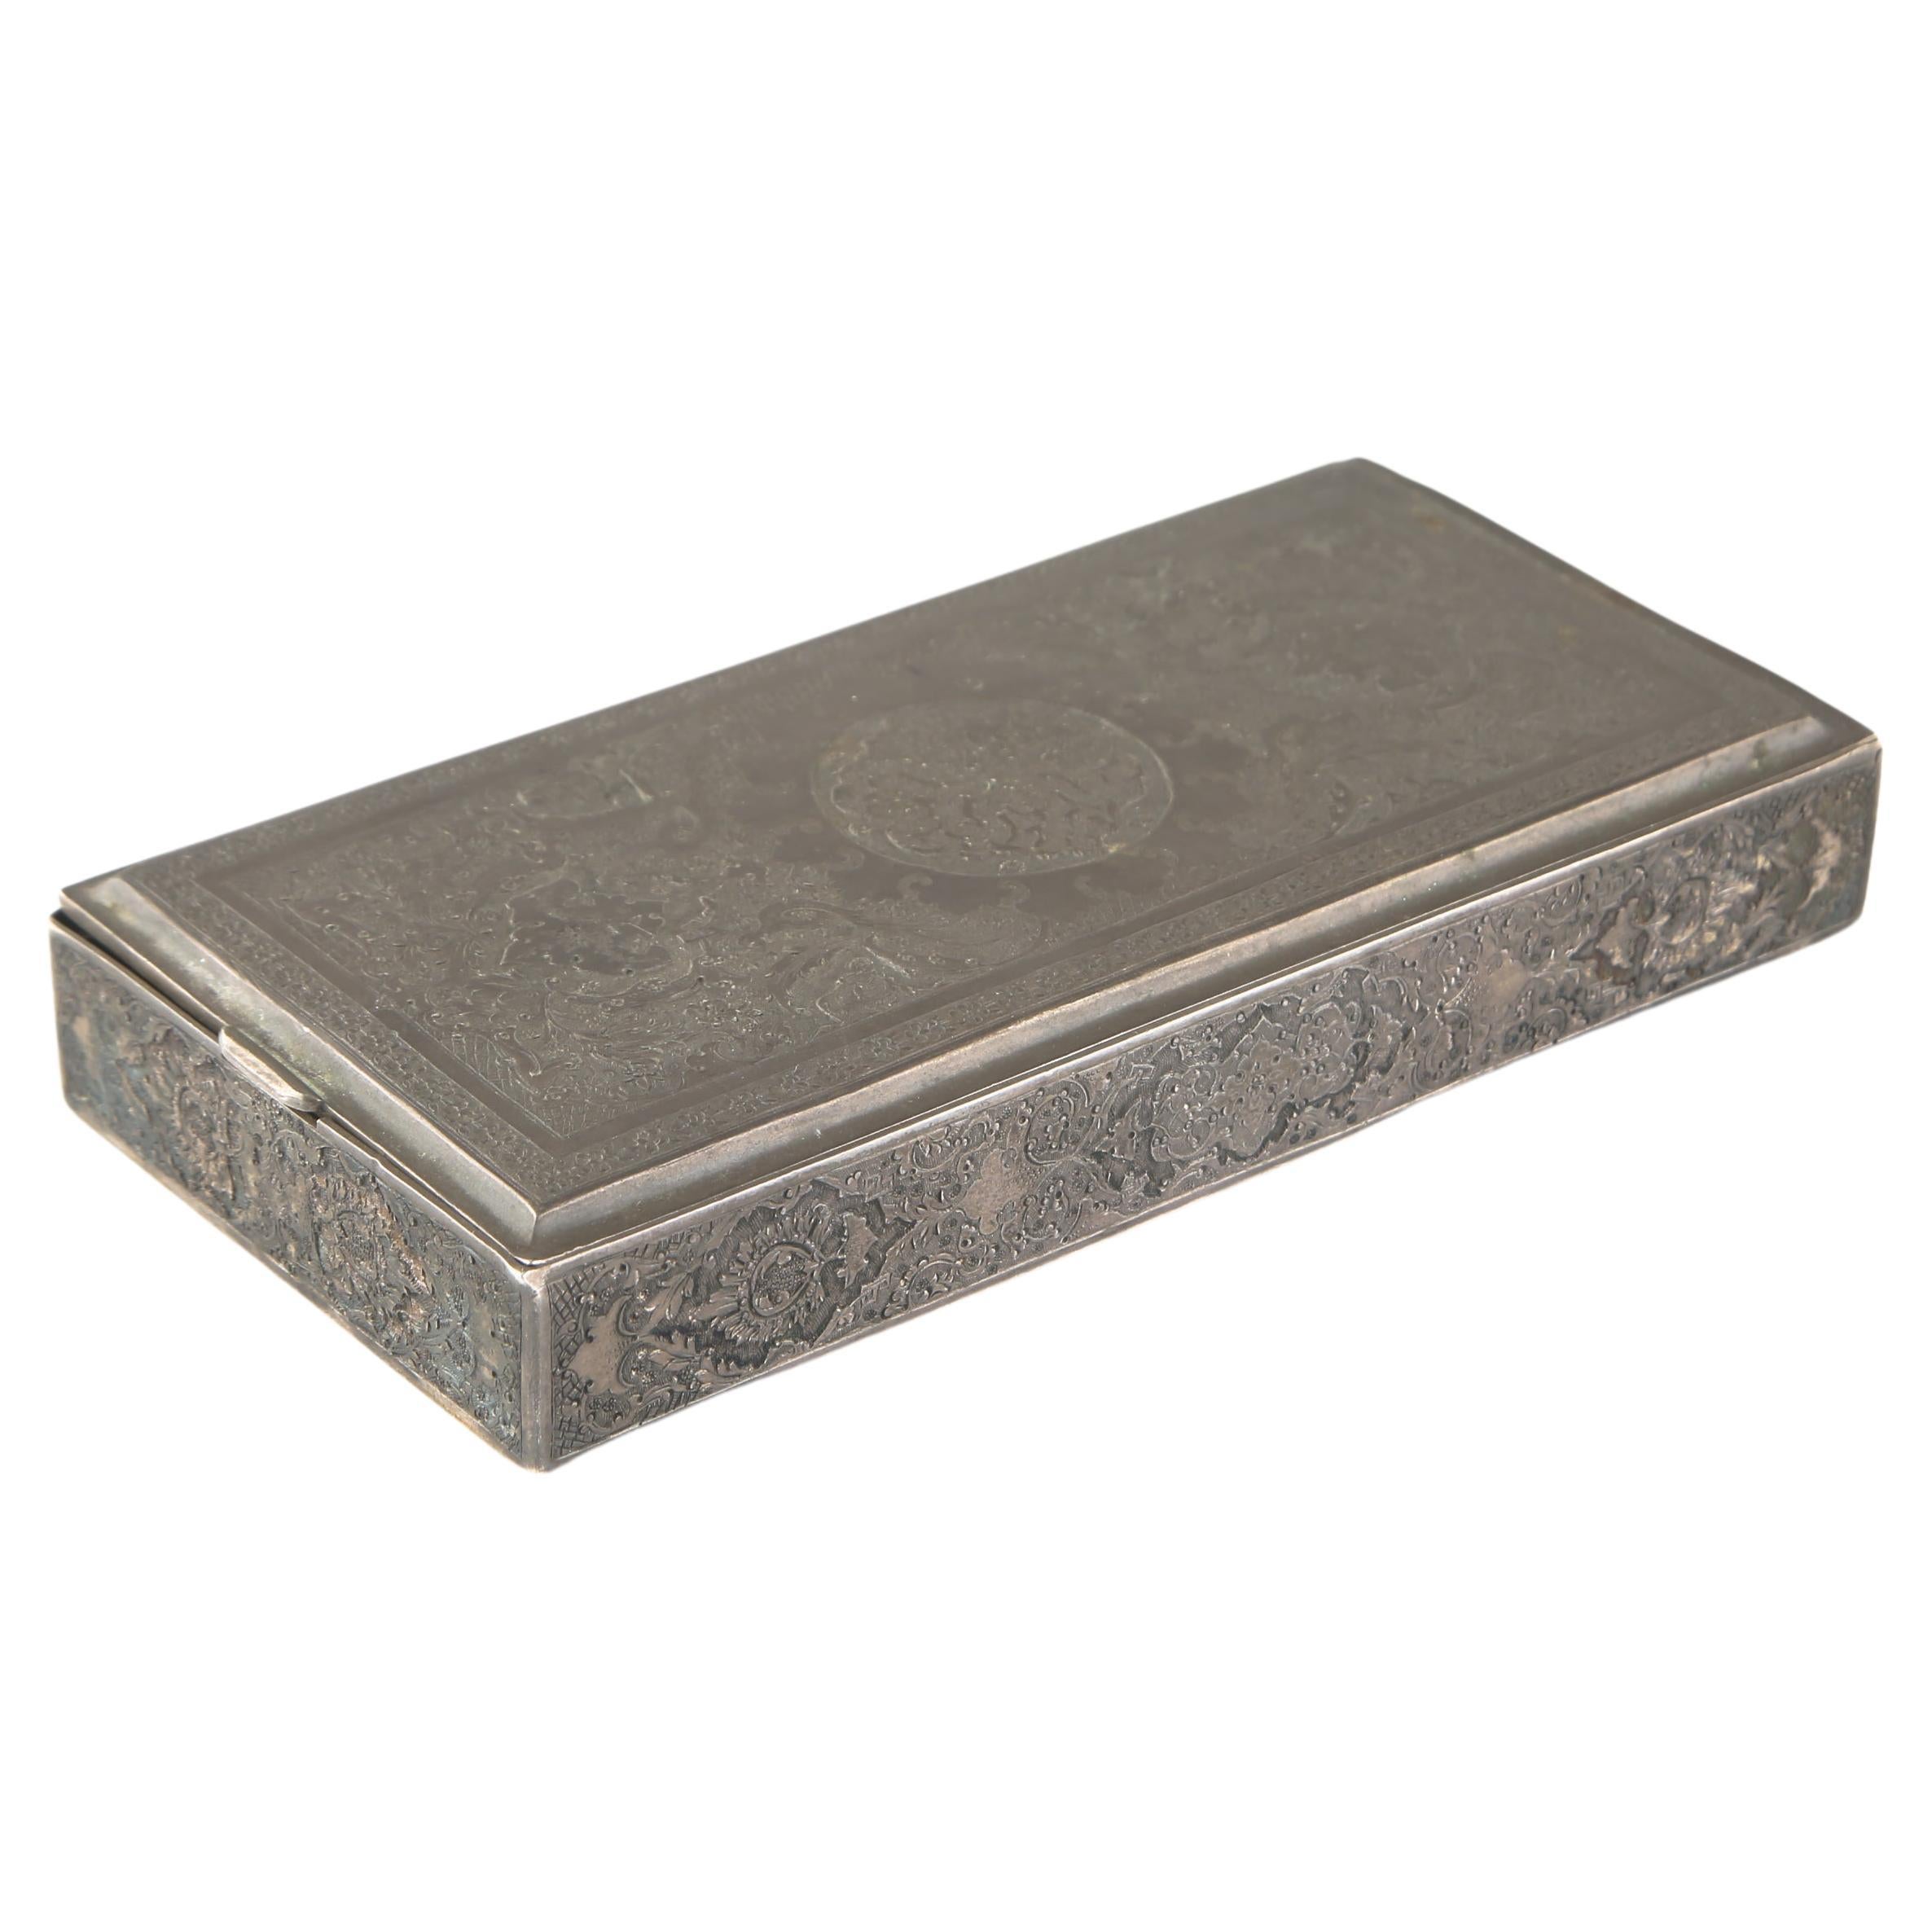 Beautiful Antique Persian Hinged Engraved Solid Silver Box - Hallmarked (275g) For Sale